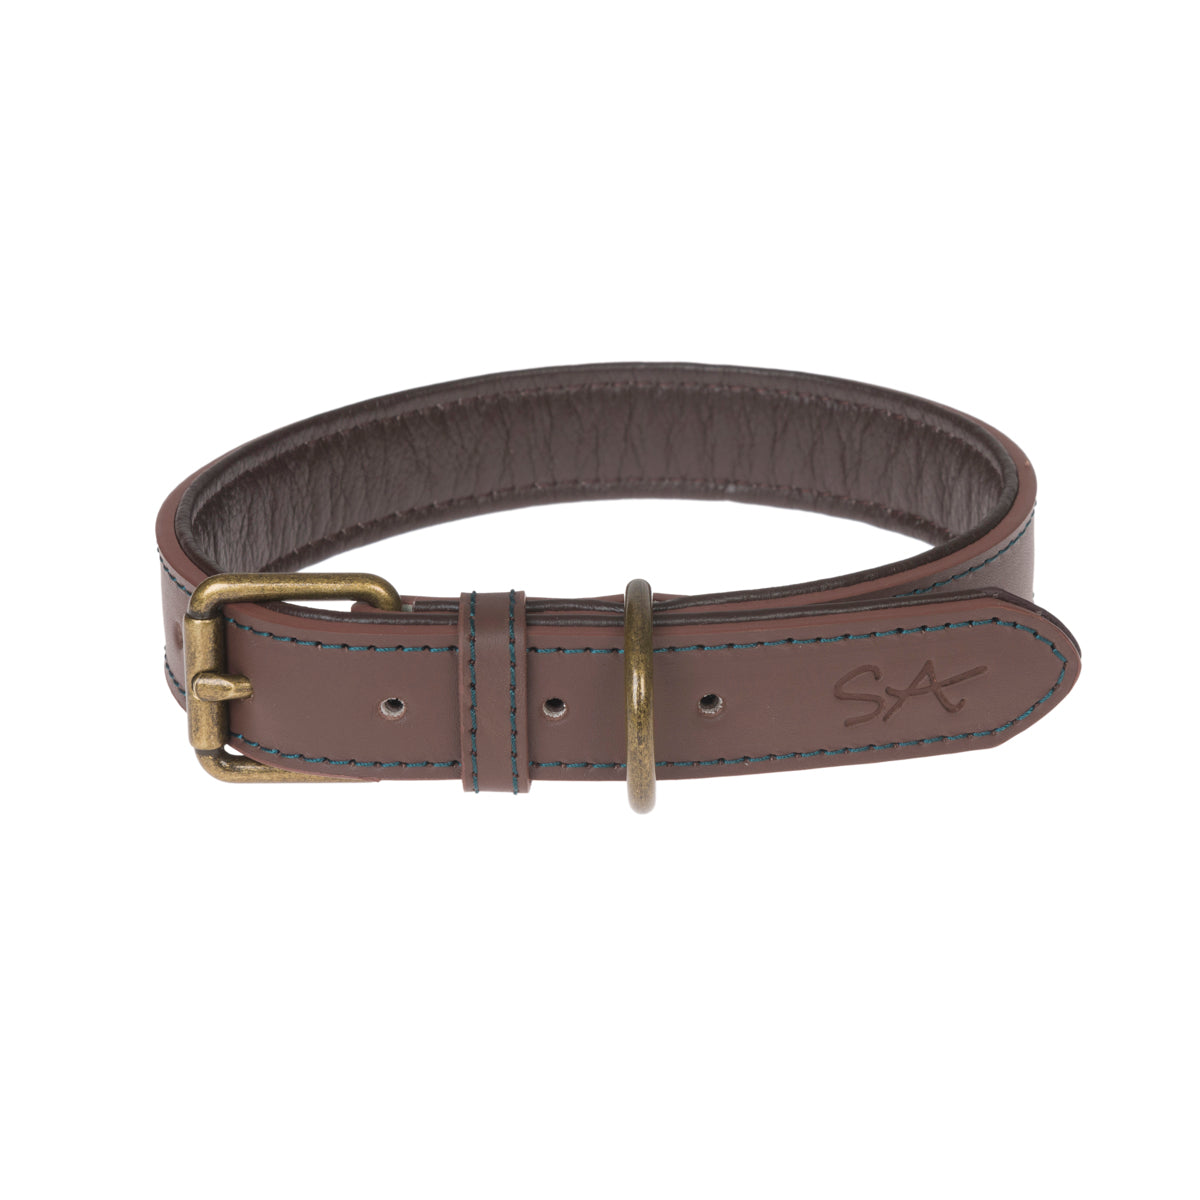 Woof Leather Large Dog Collar